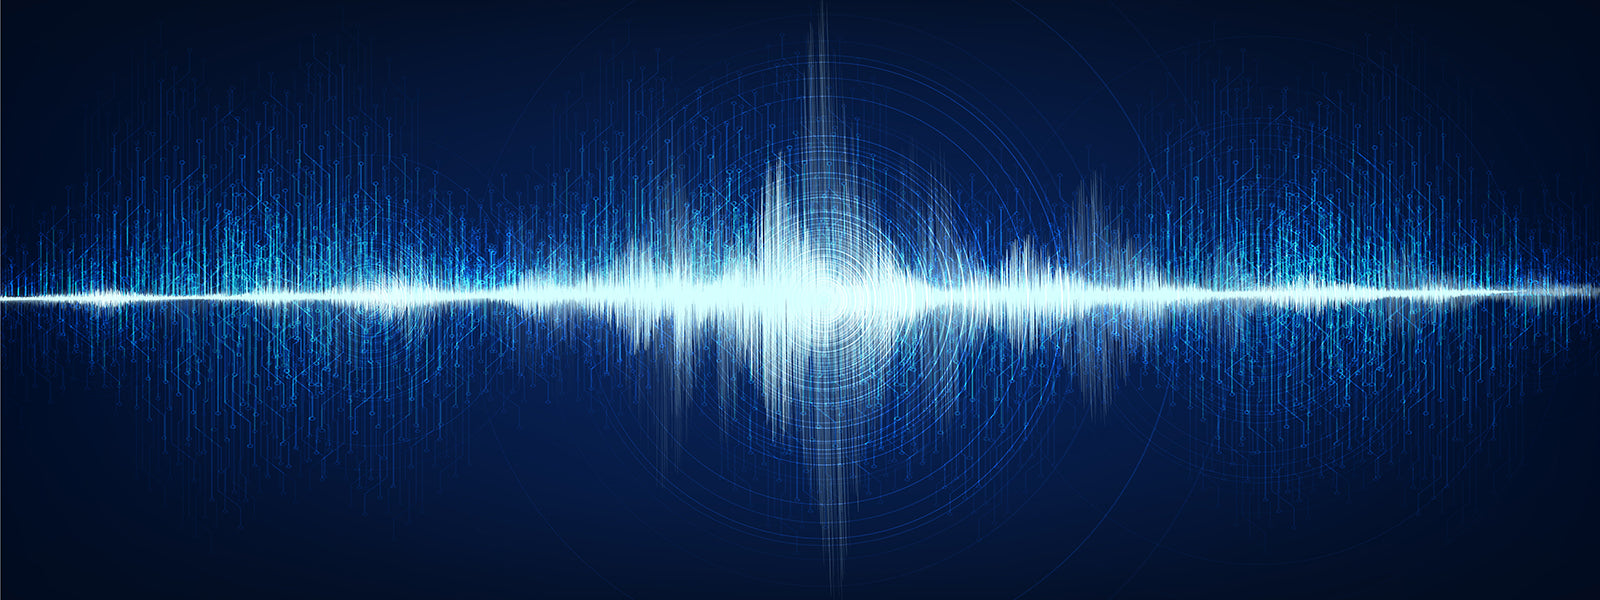 What is Frequency Response?